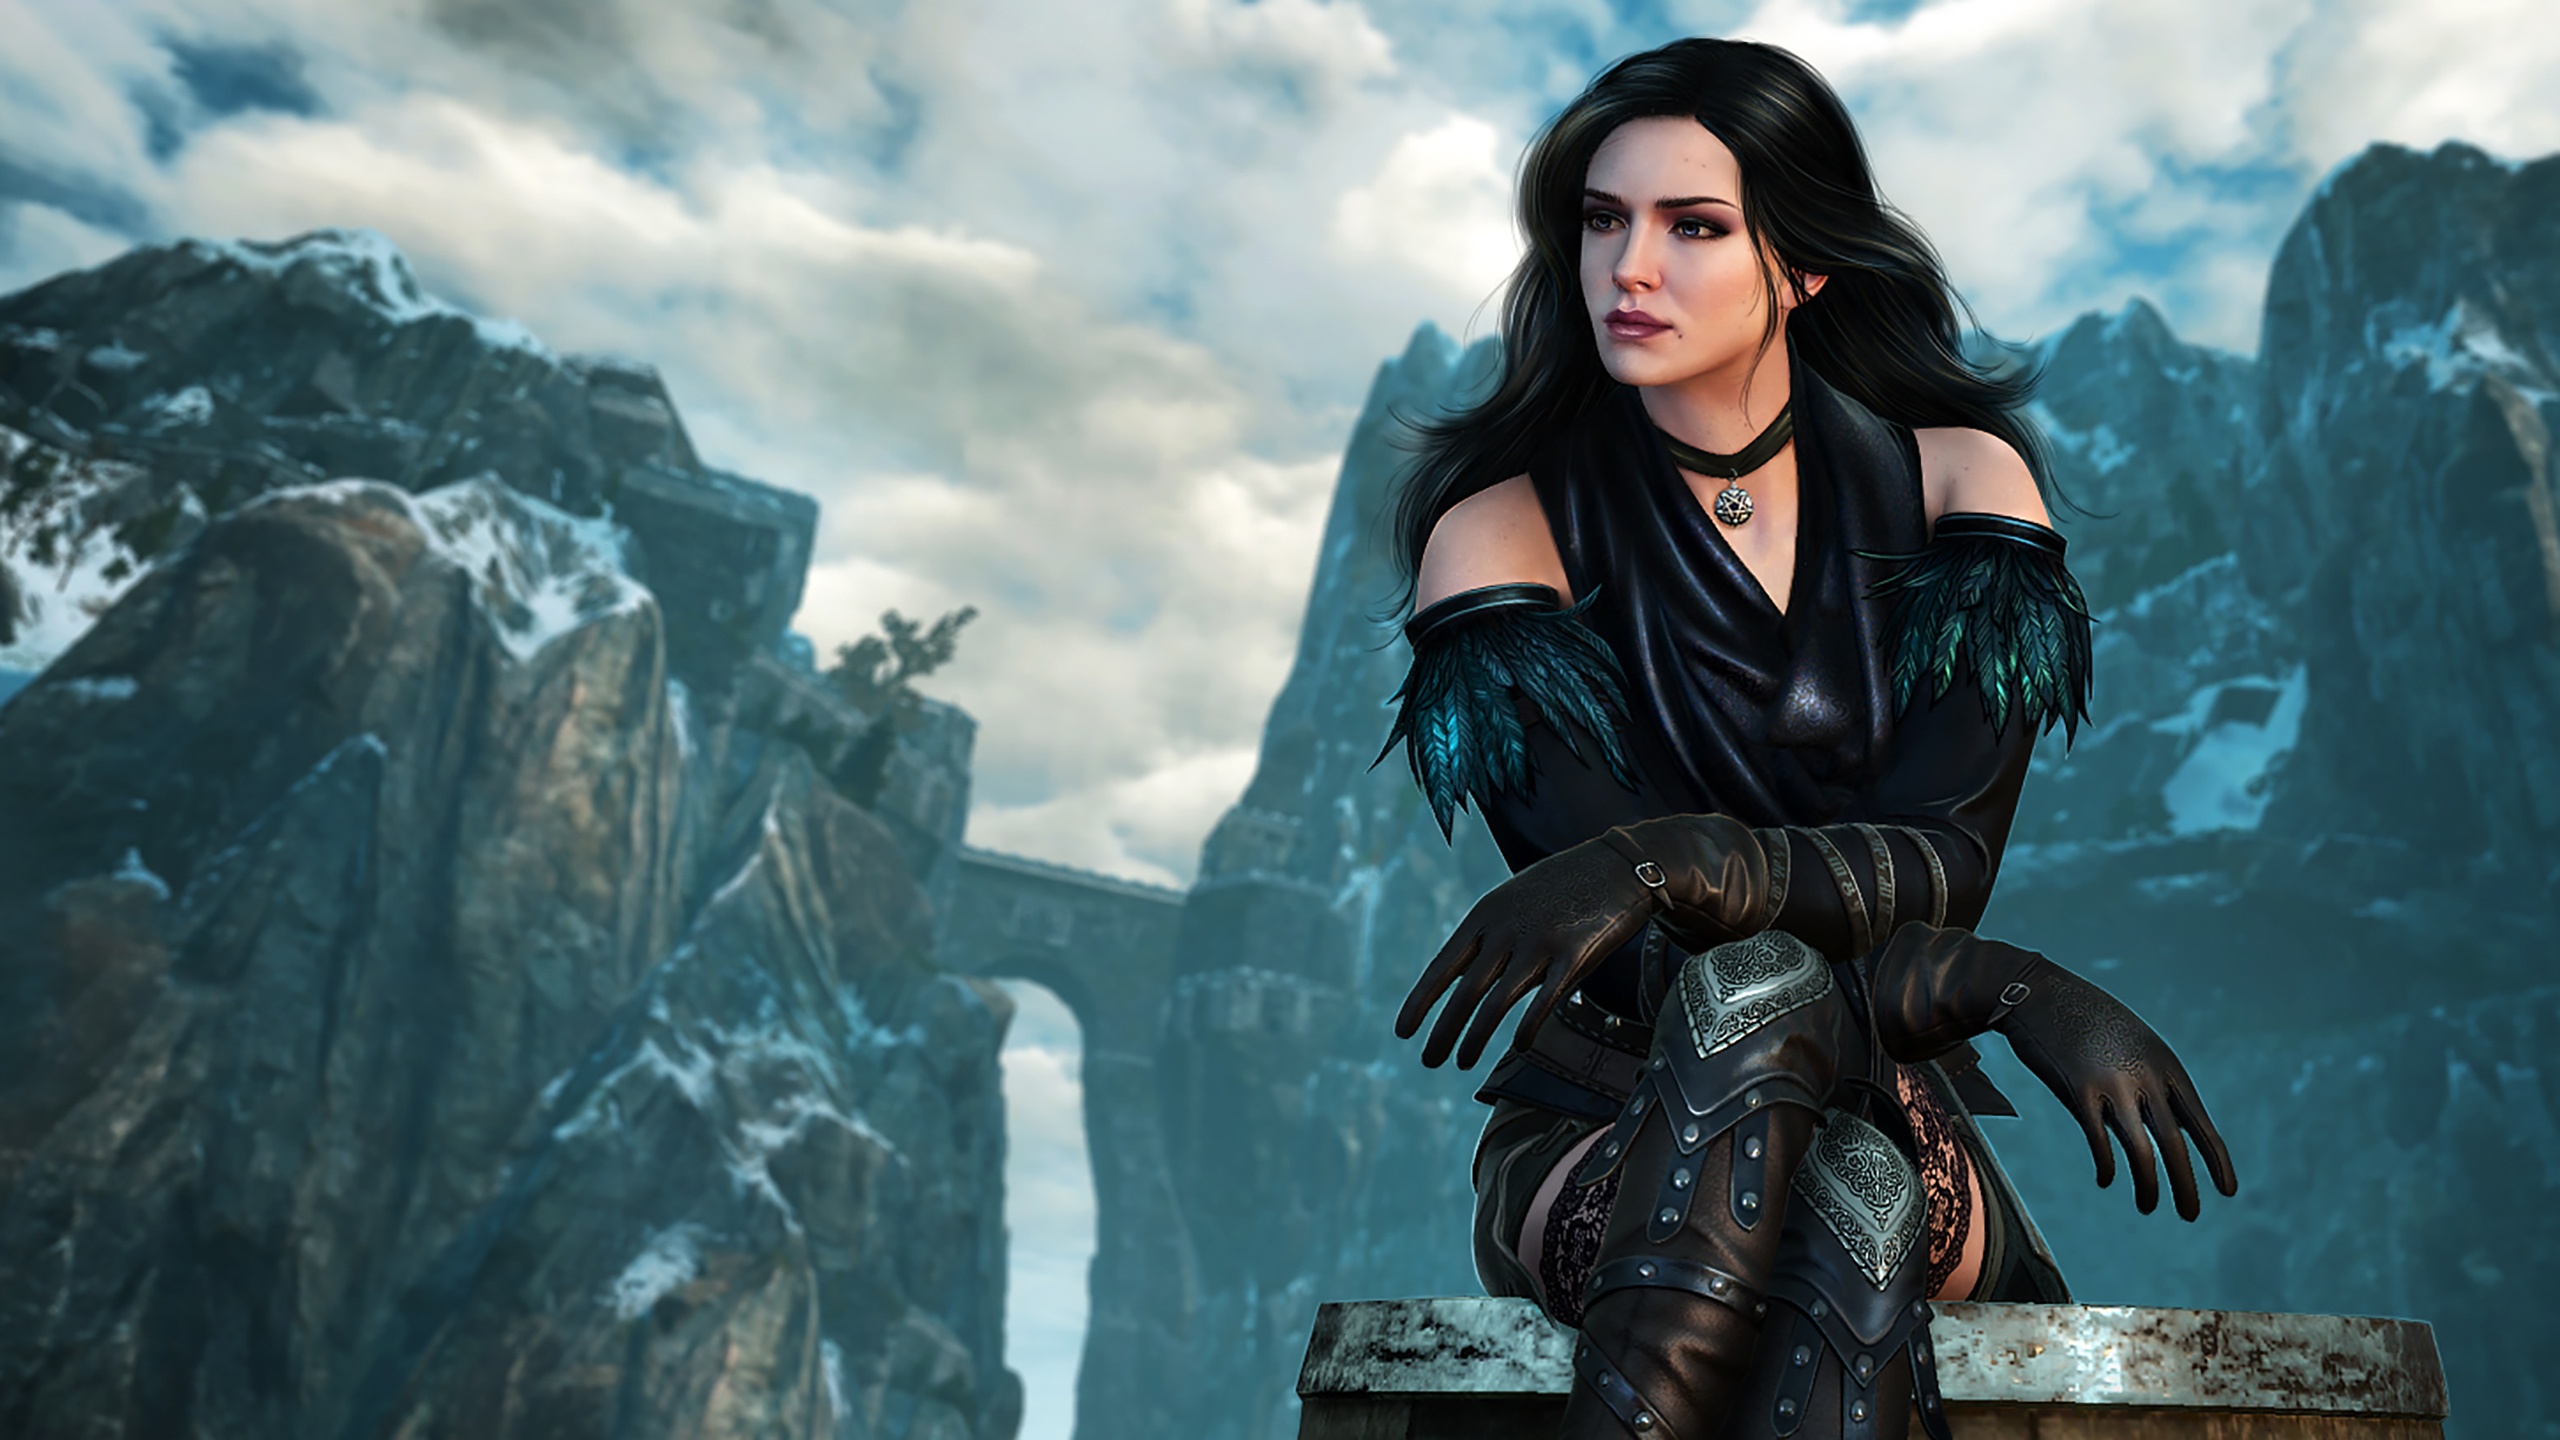 Yennefer of vengerberg the witcher 3 voiced standalone follower фото 8